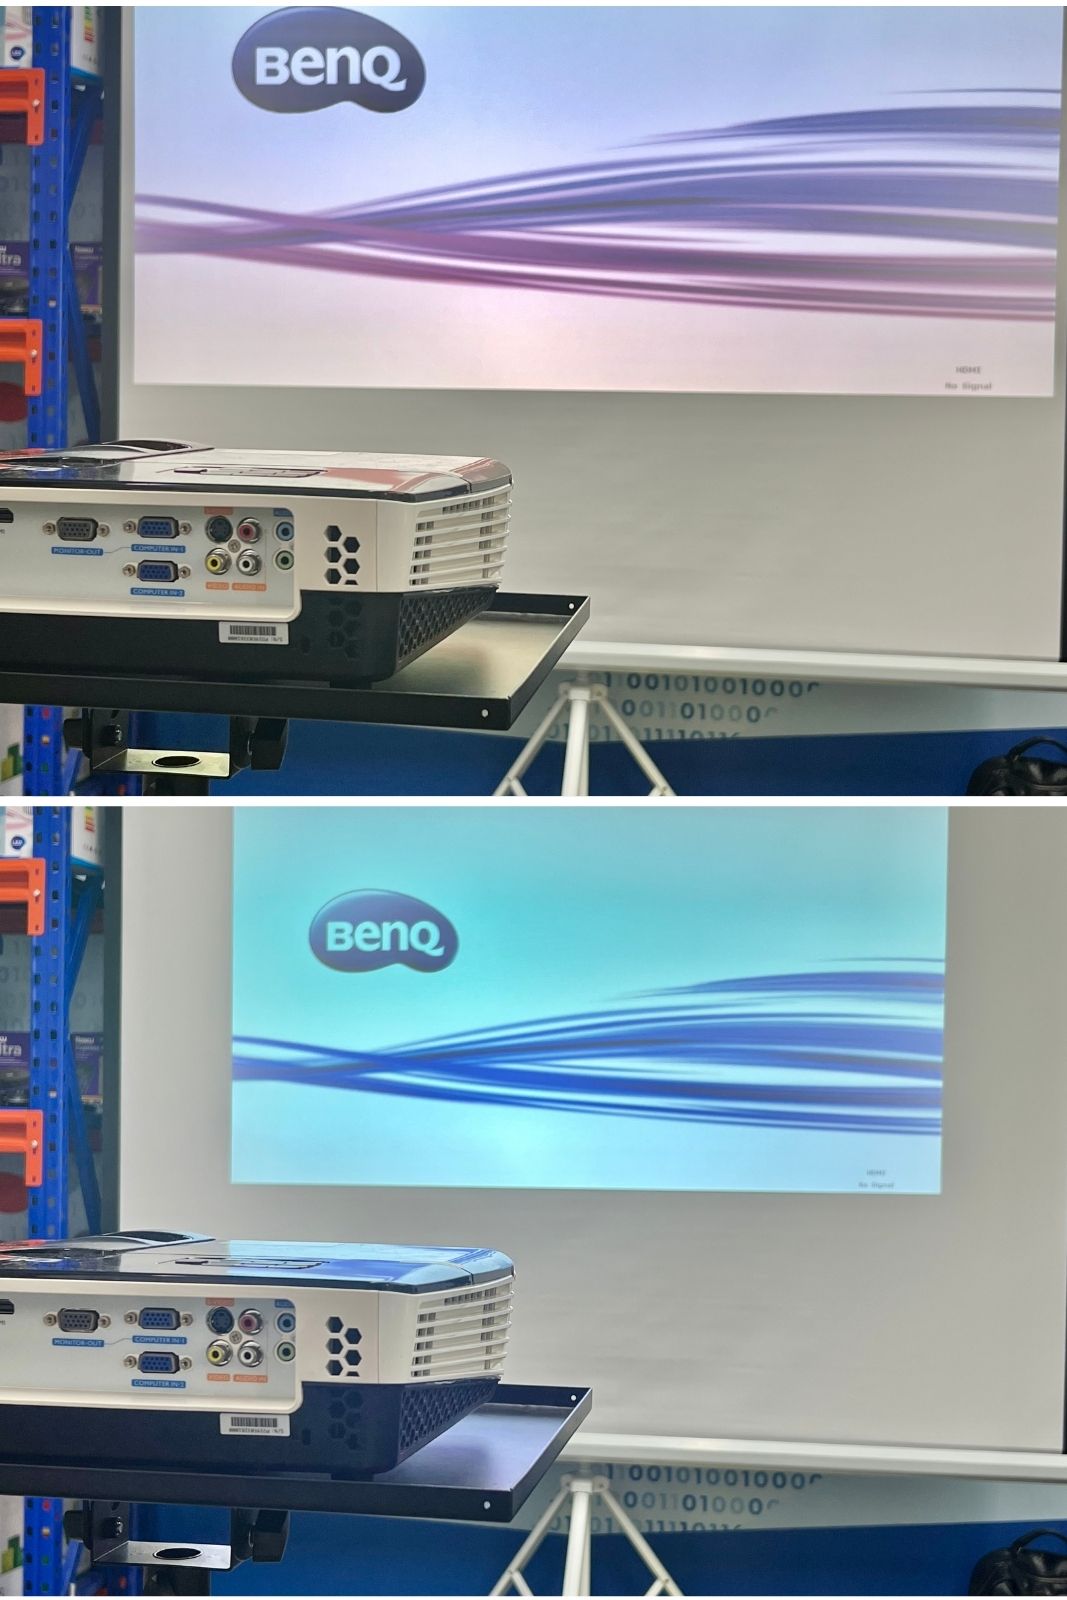 benq projector's zoom feature